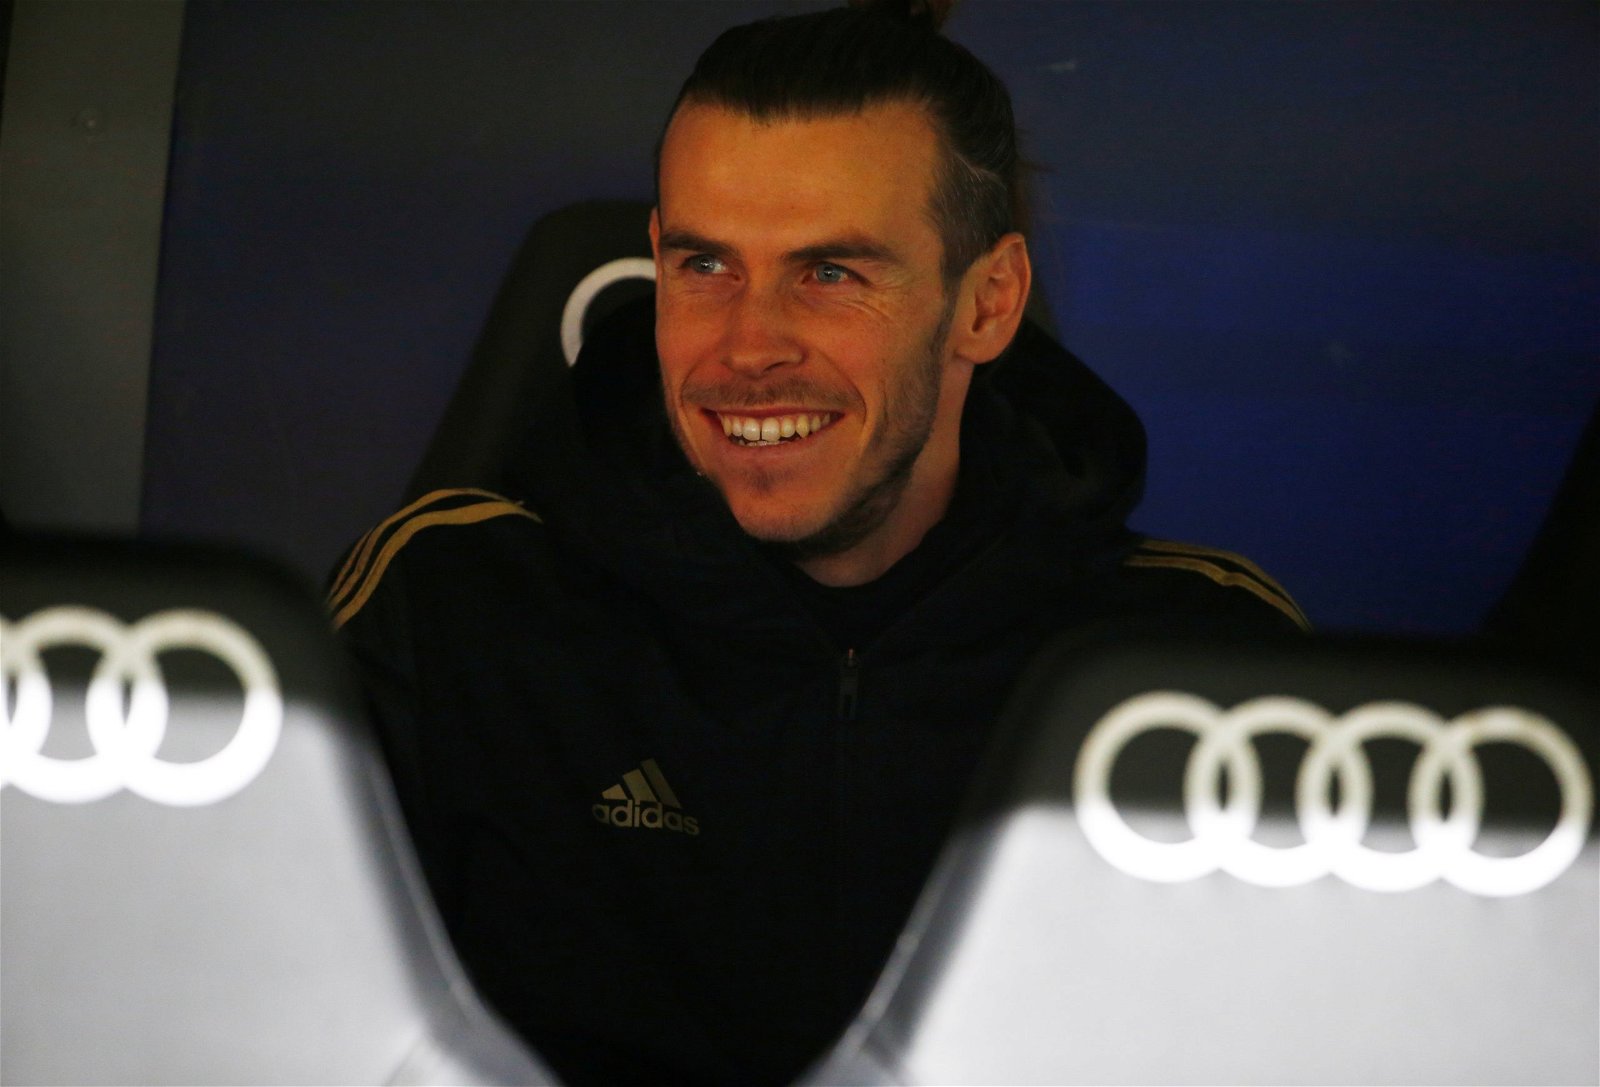 Gareth Bale Wants To Finish His Career At Real Madrid, Agent Reveals